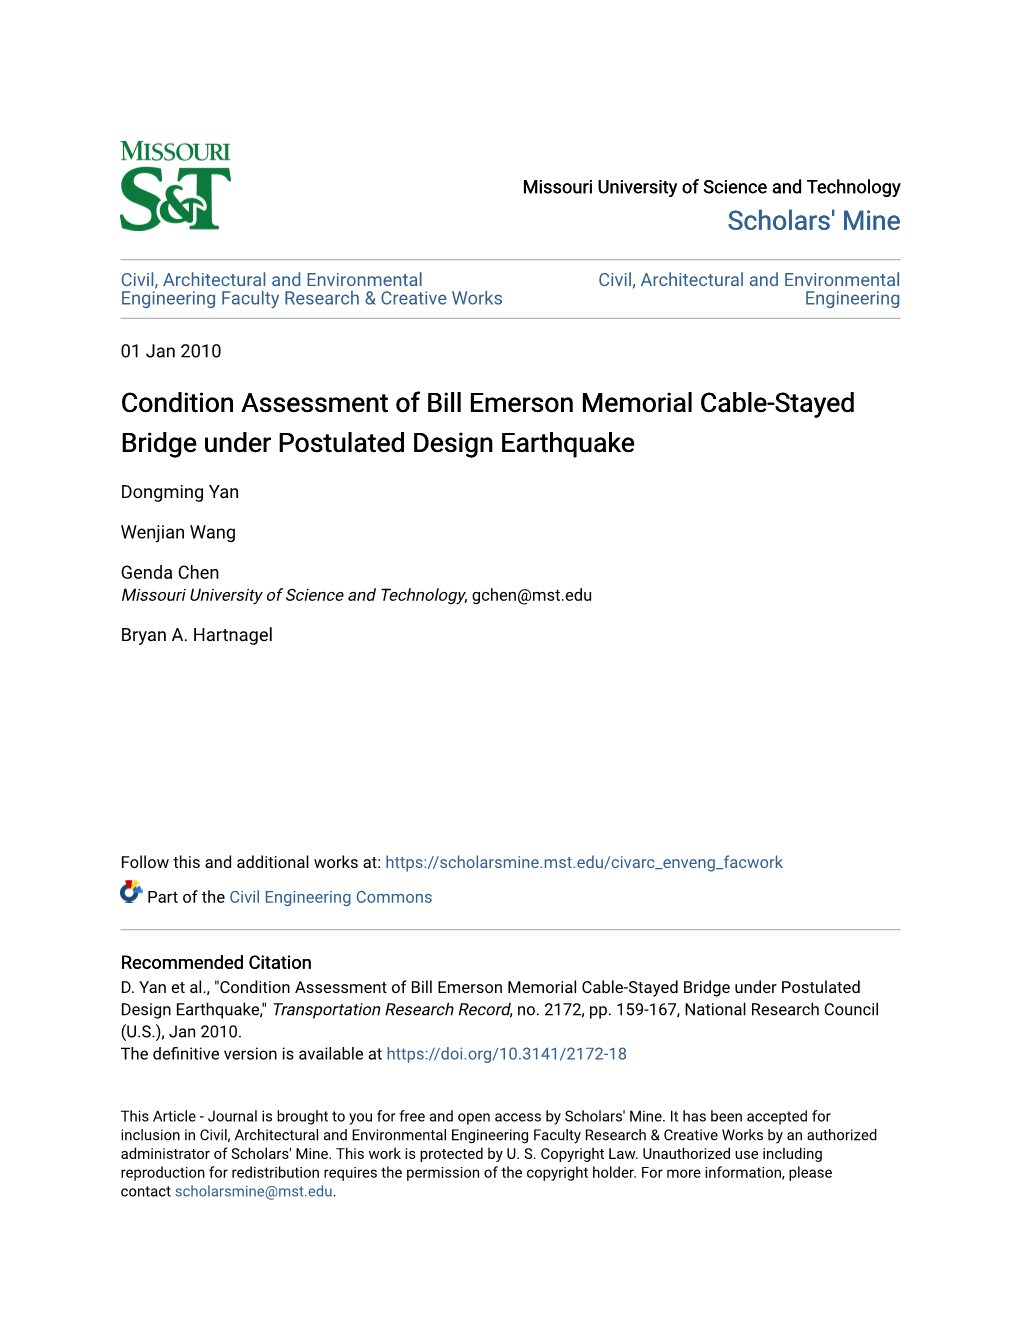 Condition Assessment of Bill Emerson Memorial Cable-Stayed Bridge Under Postulated Design Earthquake